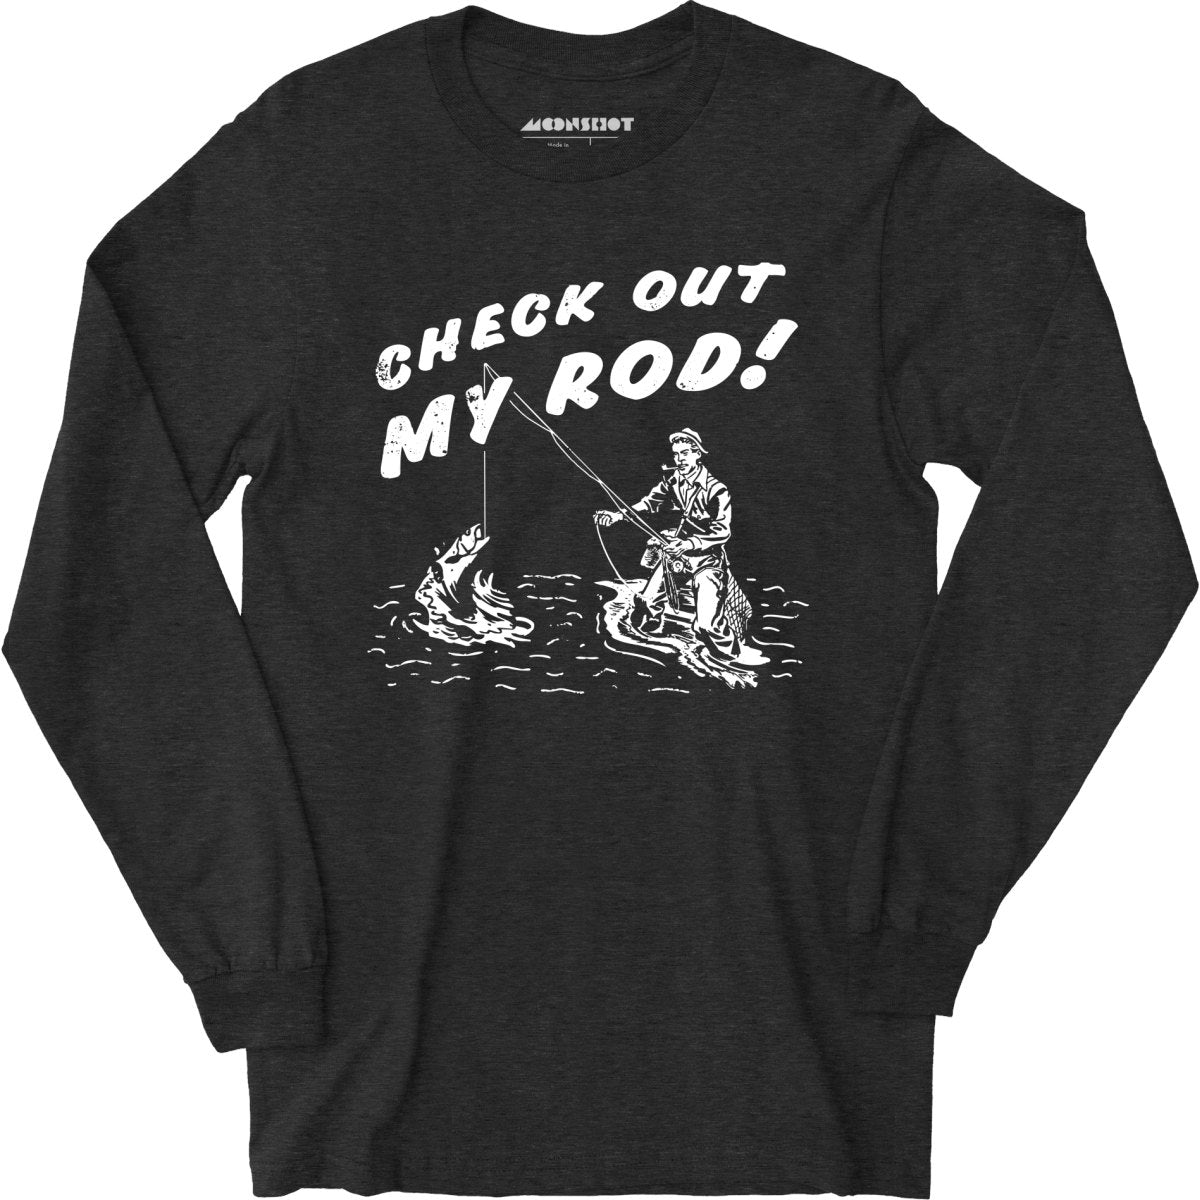 Check Out My Rod - Long Sleeve T-Shirt